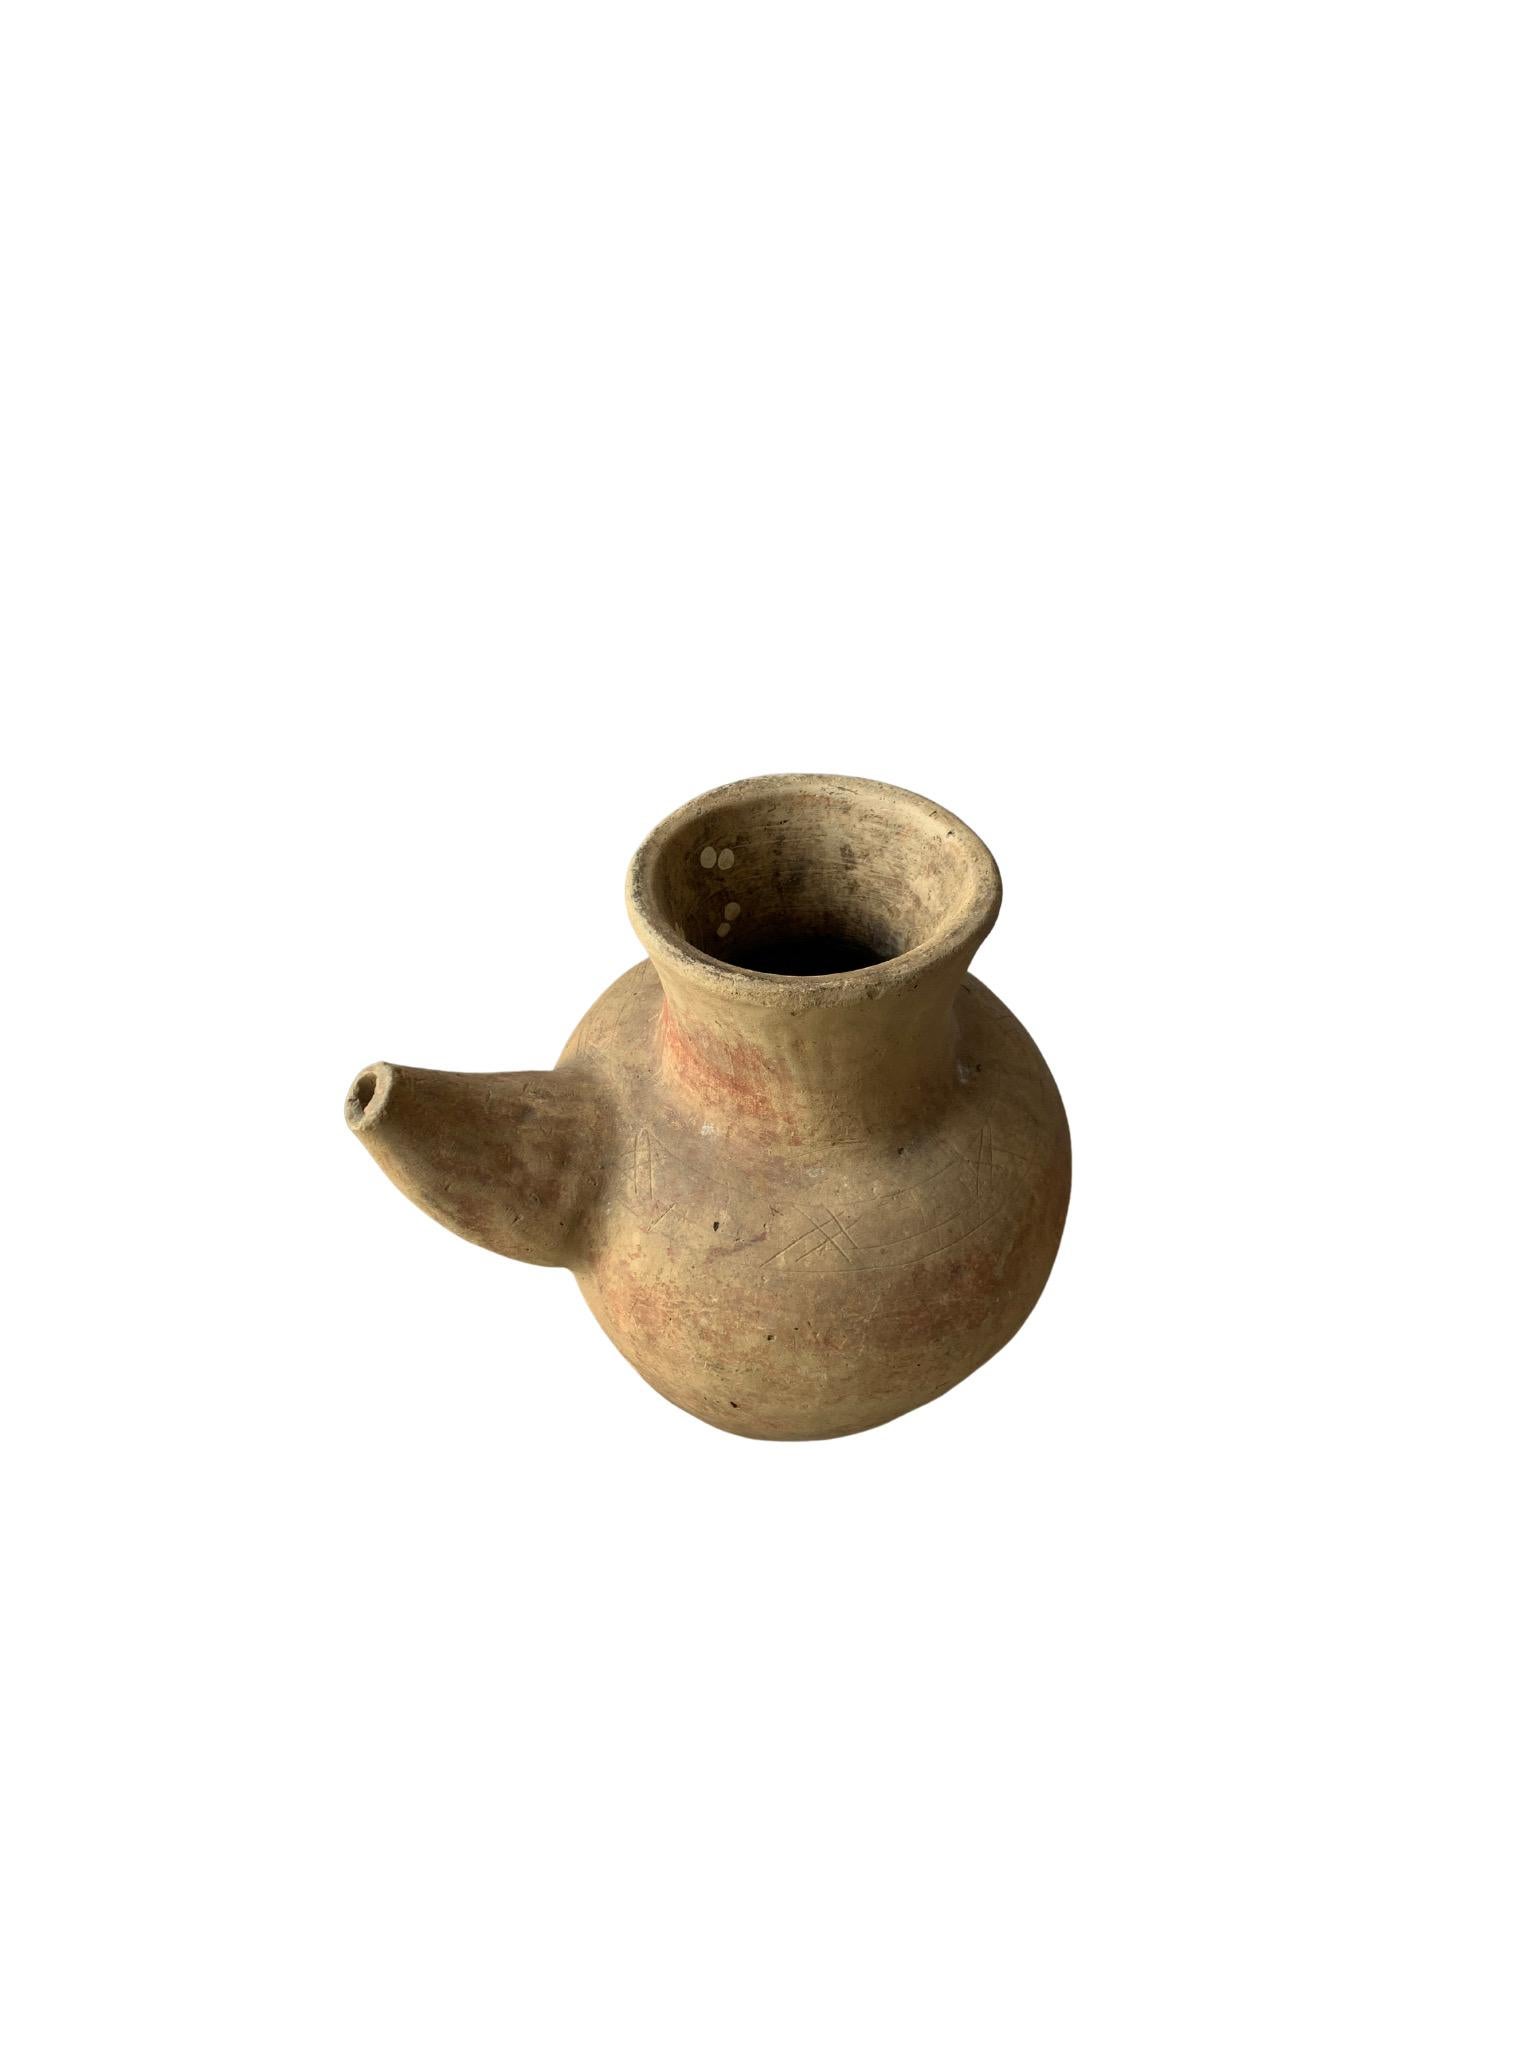 A terracotta jar from the island of Java, Indonesia with an elongated spout. Jugs such as these would have been used to store, water, oil and other liquids. The age related markings and fading to the jar add to its appeal. A versatile object to